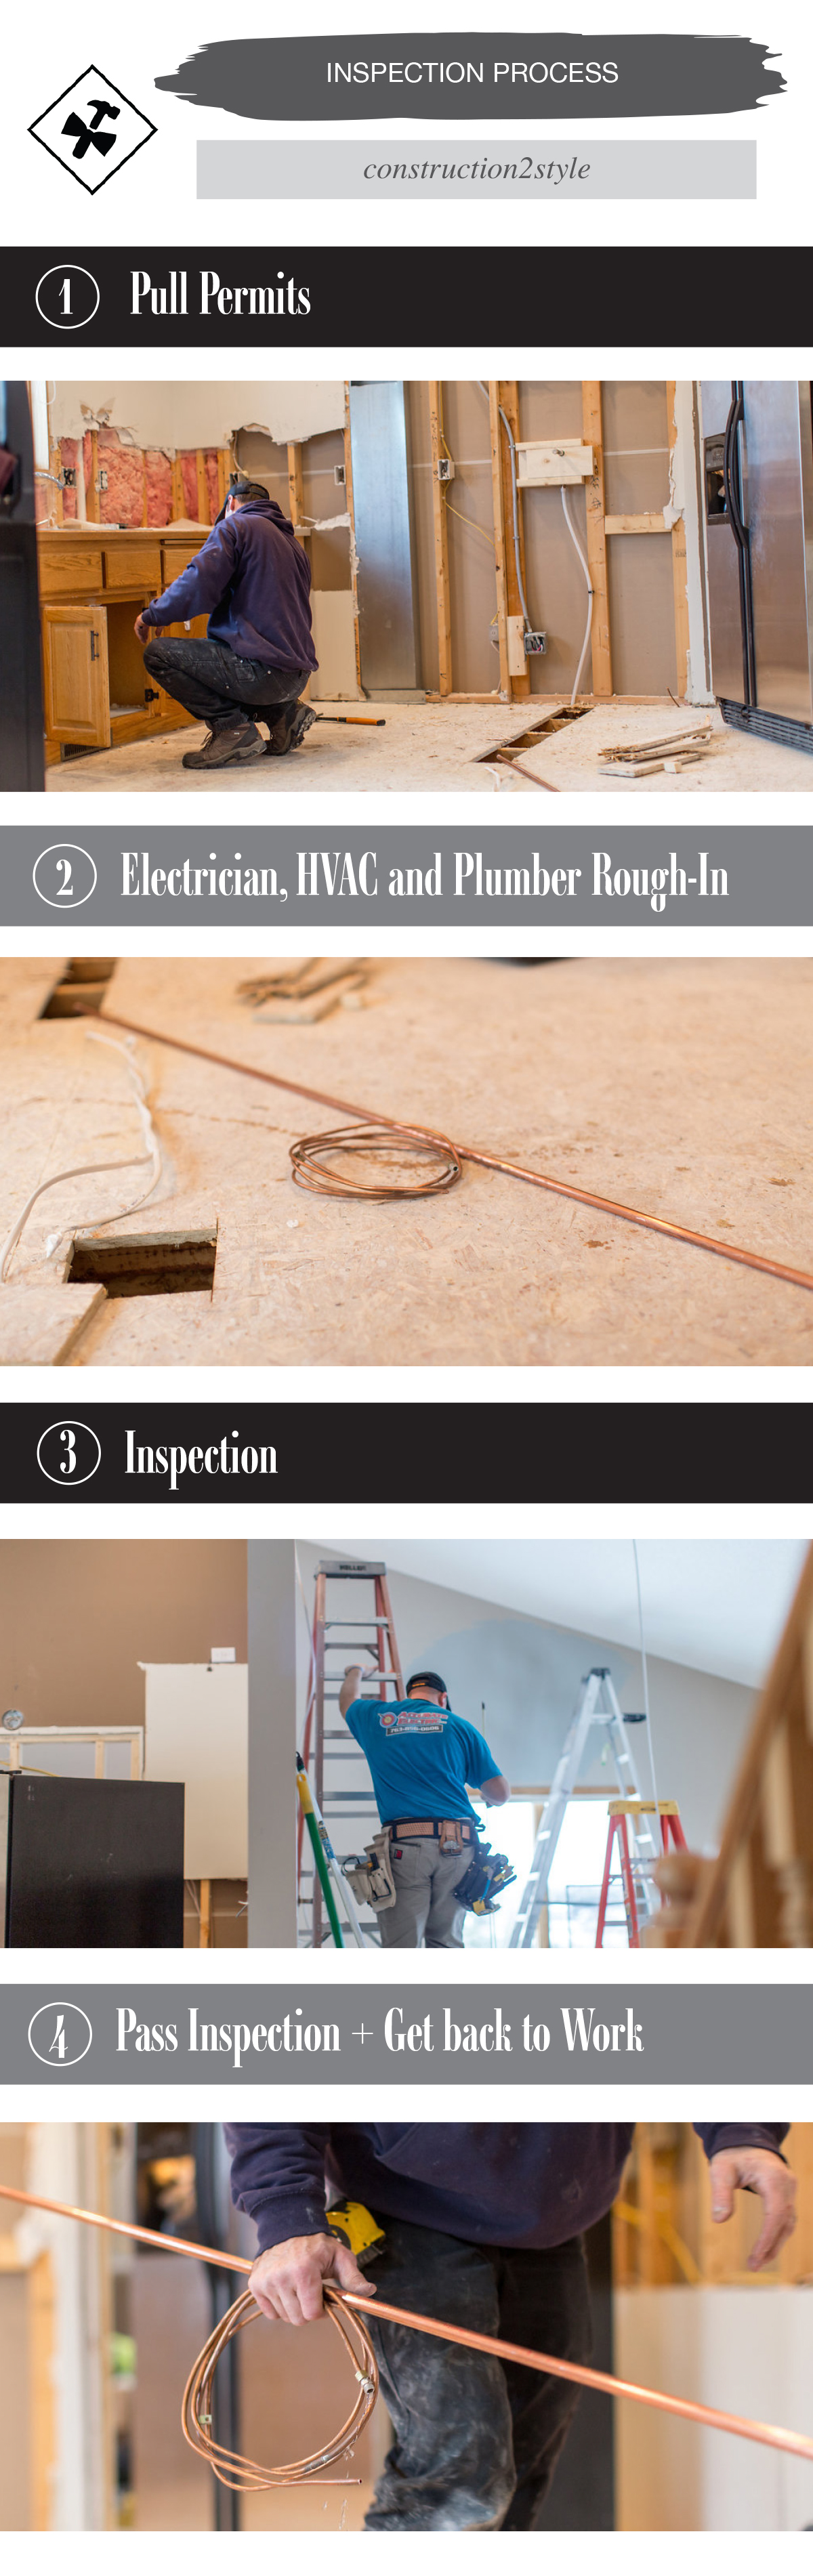 kitchen remodel inspection process steps | construction2style